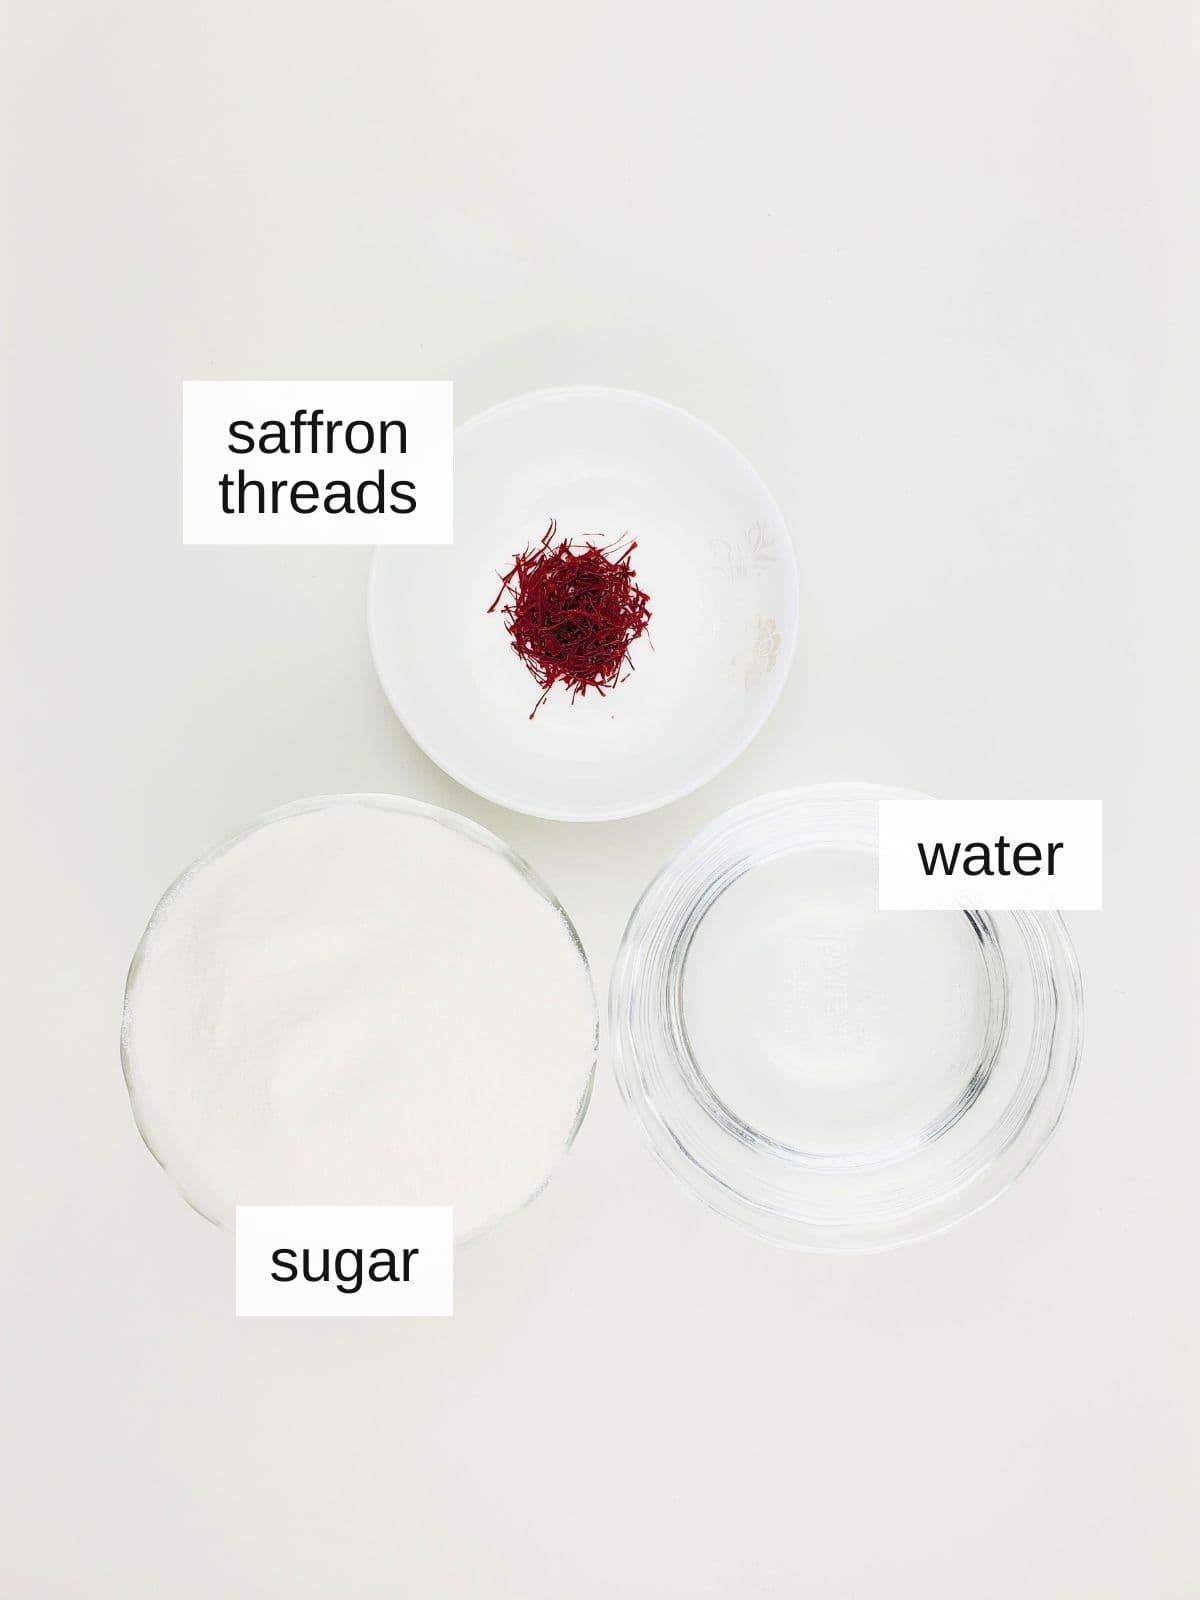 ingredients for saffron syrup, including saffron threads, sugar, and water.